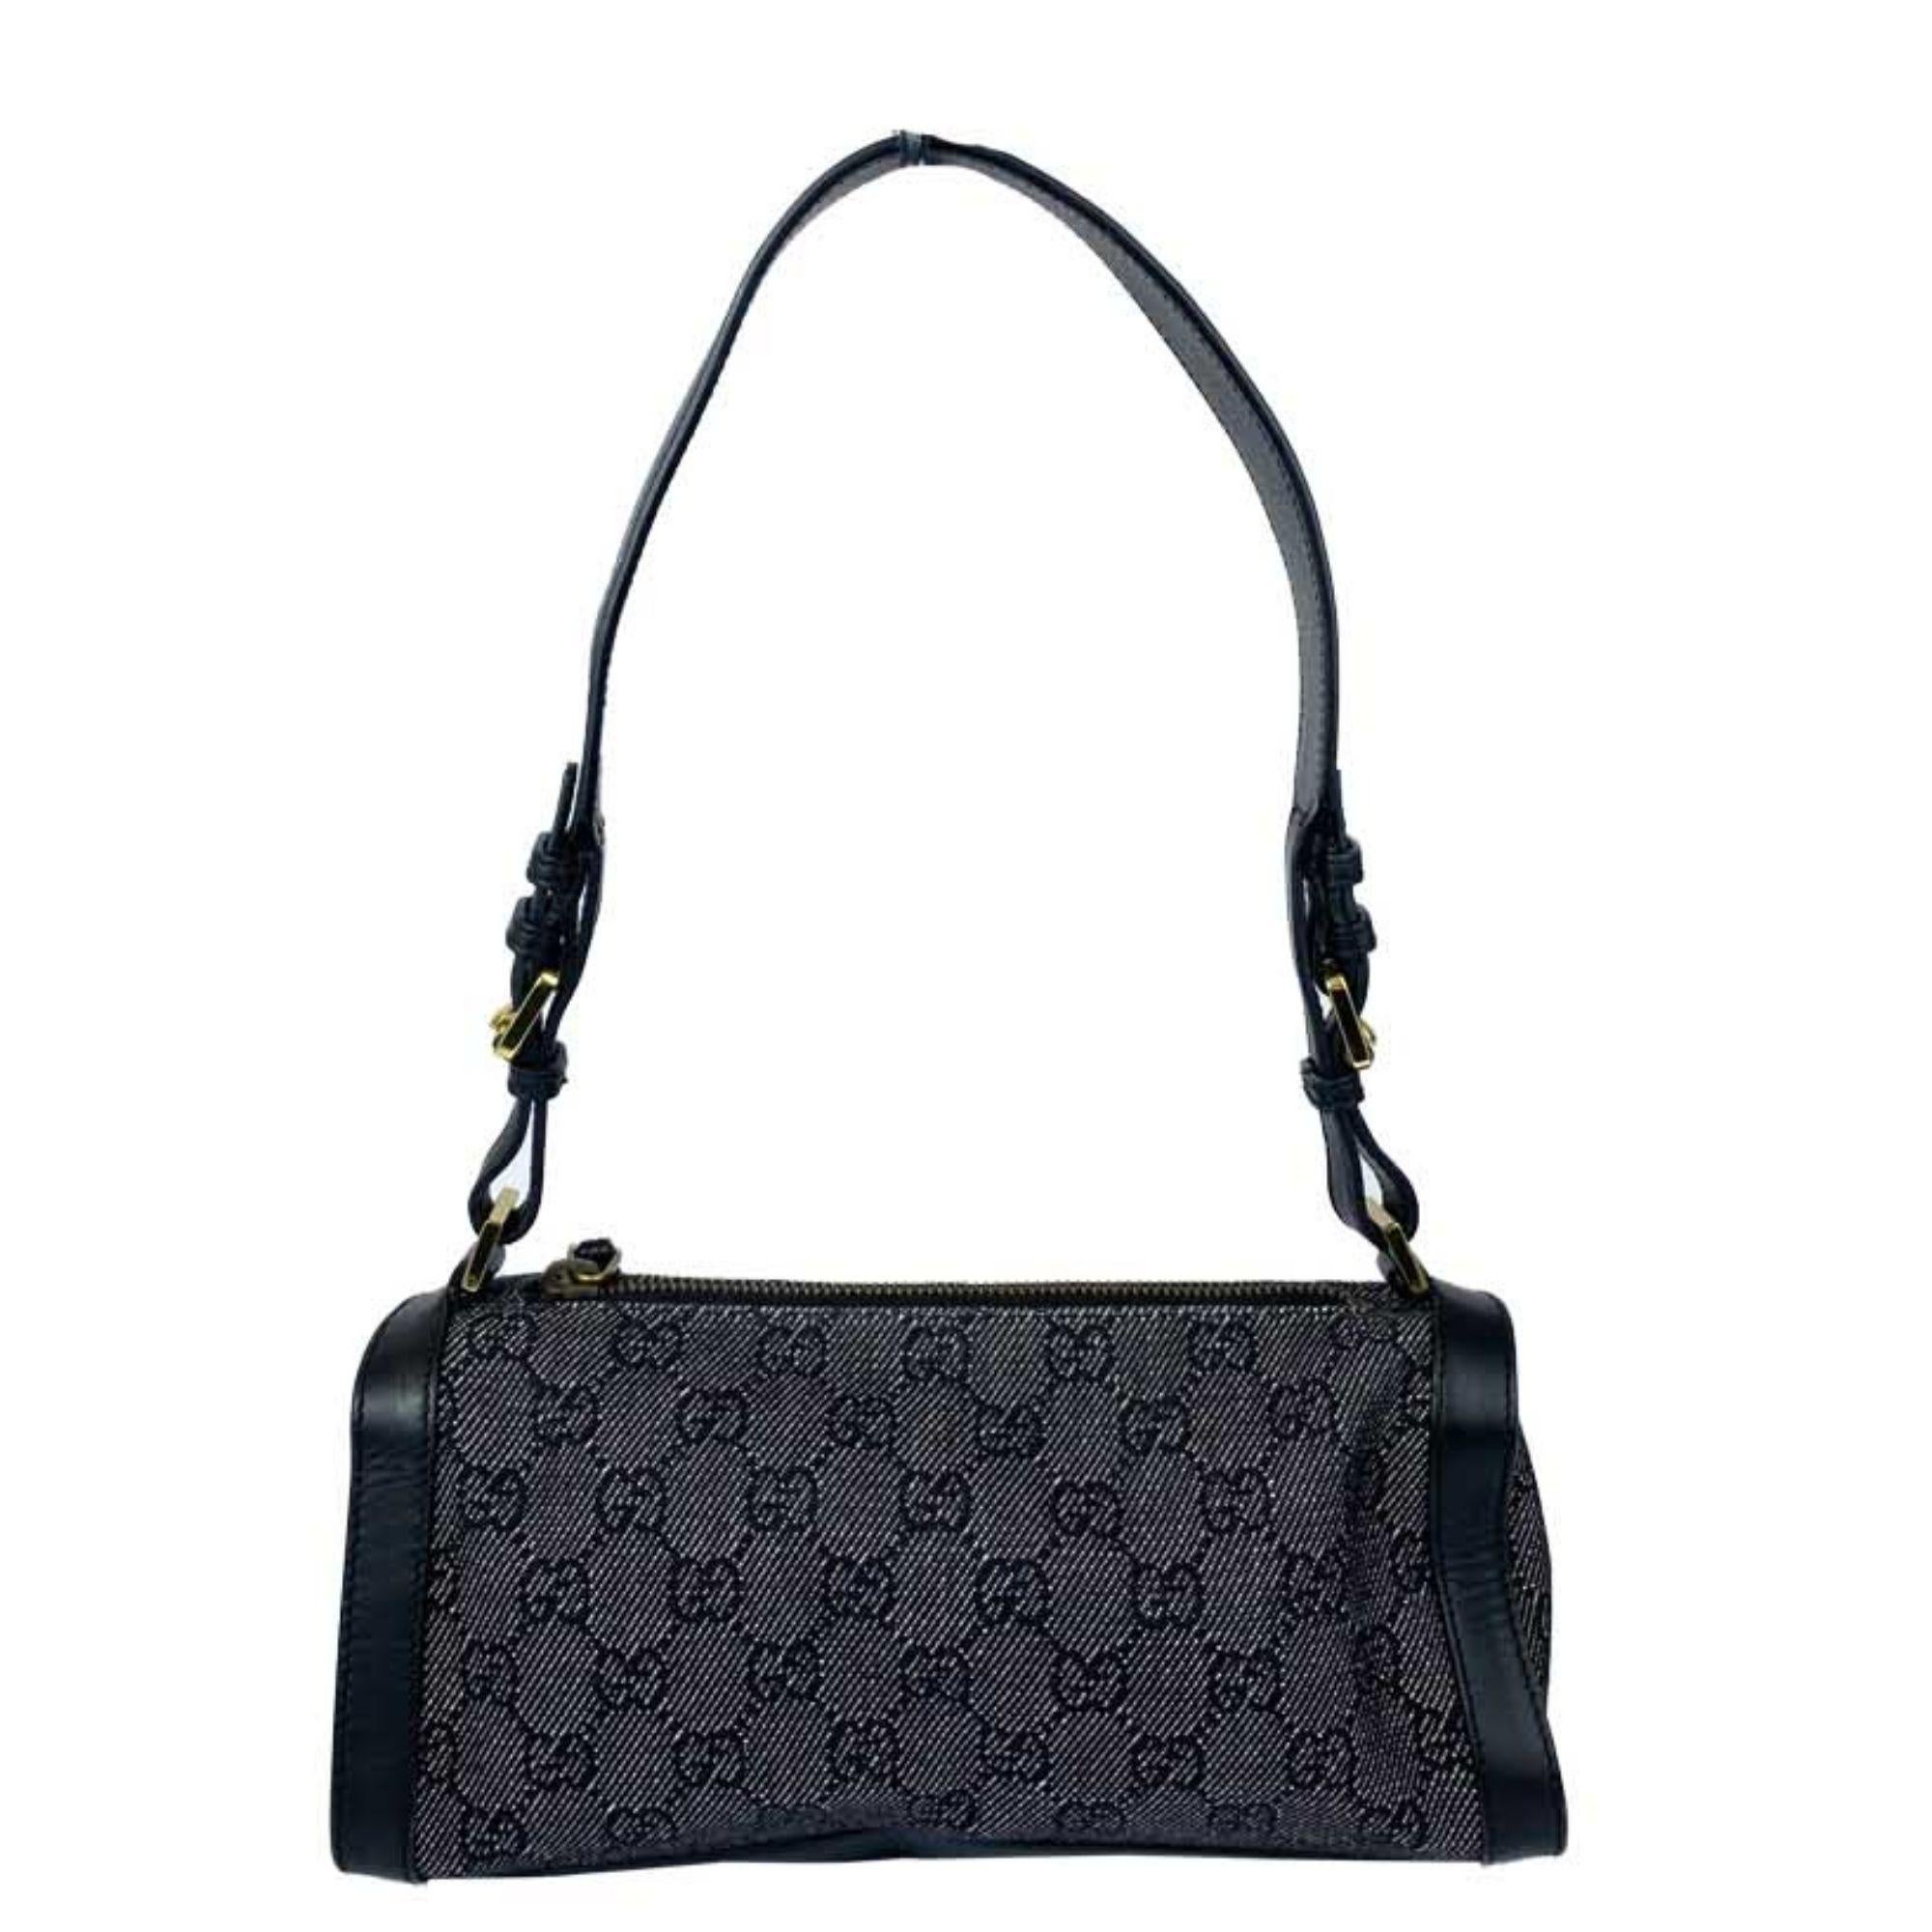 Gucci mini charcoal canvas handbag. Monogram print canvas with gold hardware and black leather strap and trim. One zipper pocket inside. In excellent condition slight wear on the zipper.

Measurements:
Height: 12cm
Width: 23.5cm
Depth: 7cm
Handle